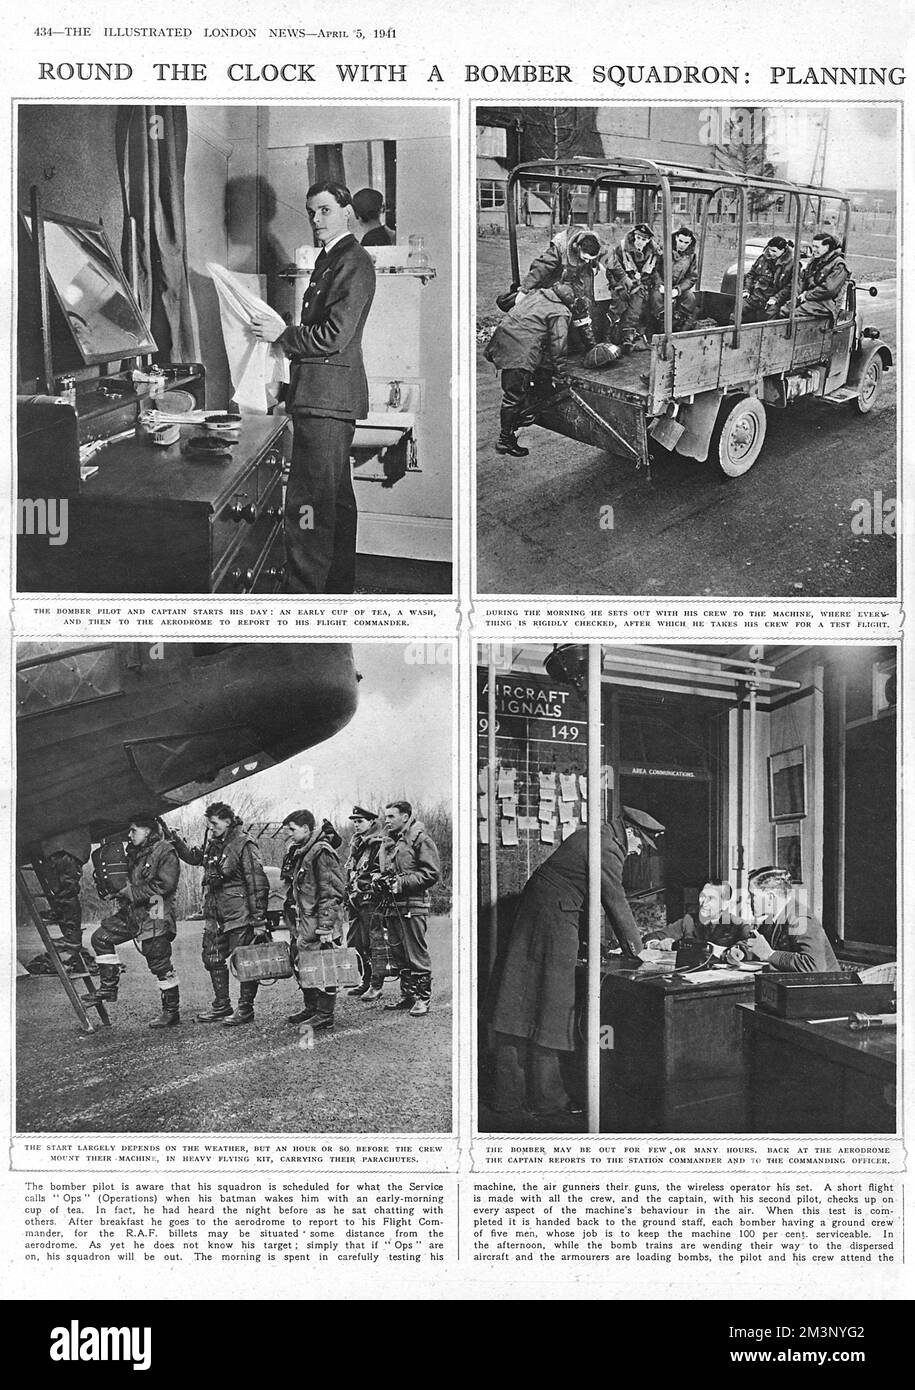 Round the clock with a bomber squadron. The bomber pilot and captain starts his day with a wash; he sets out with his crew on the back of a vehicle; the crew climb a ladder to board the aircraft wearing heavy flying kit and carrying their parachutes; back at the aerodrome the captain reports to the station commander and commanding officer. First page of a double page spread of photographs in the Illustrated London News.     Date: 1941 Stock Photo